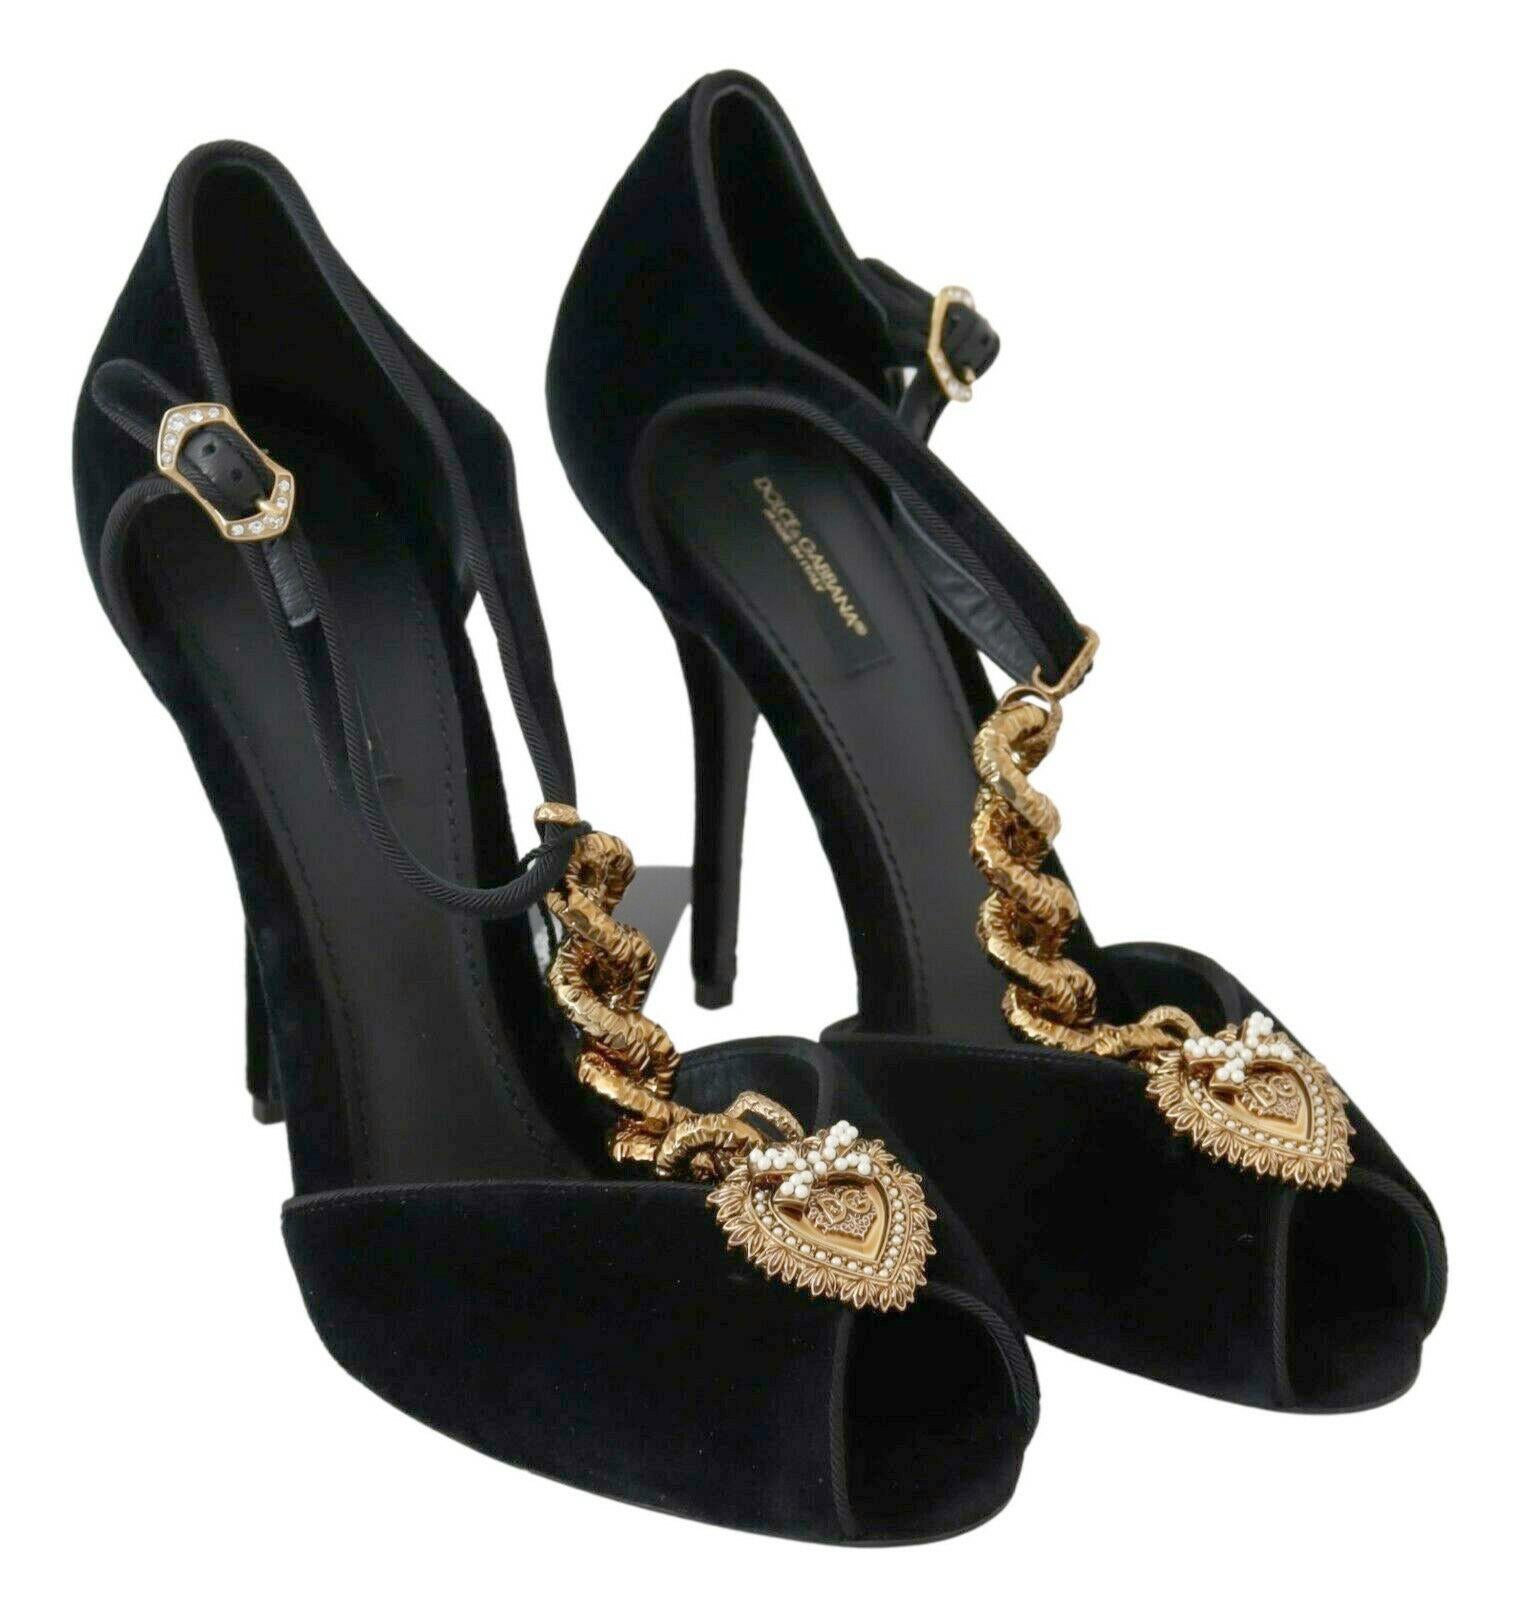 Dolce & Gabbana Black Gold Mary Jane Shoes Heels Pumps With DG Logo Heart Pearls 1